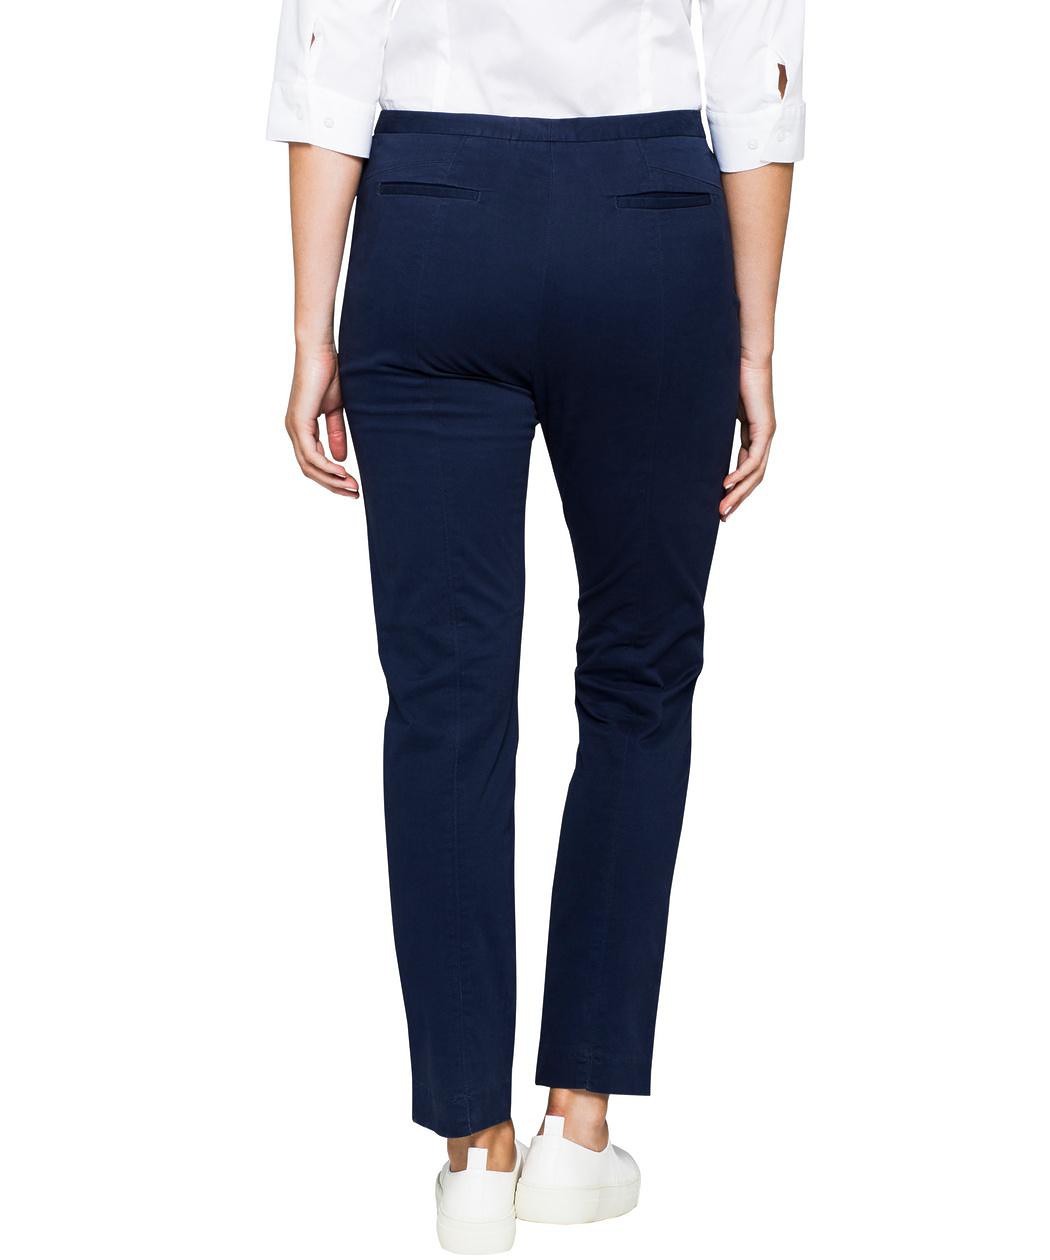 womens business casual pants photo - 1